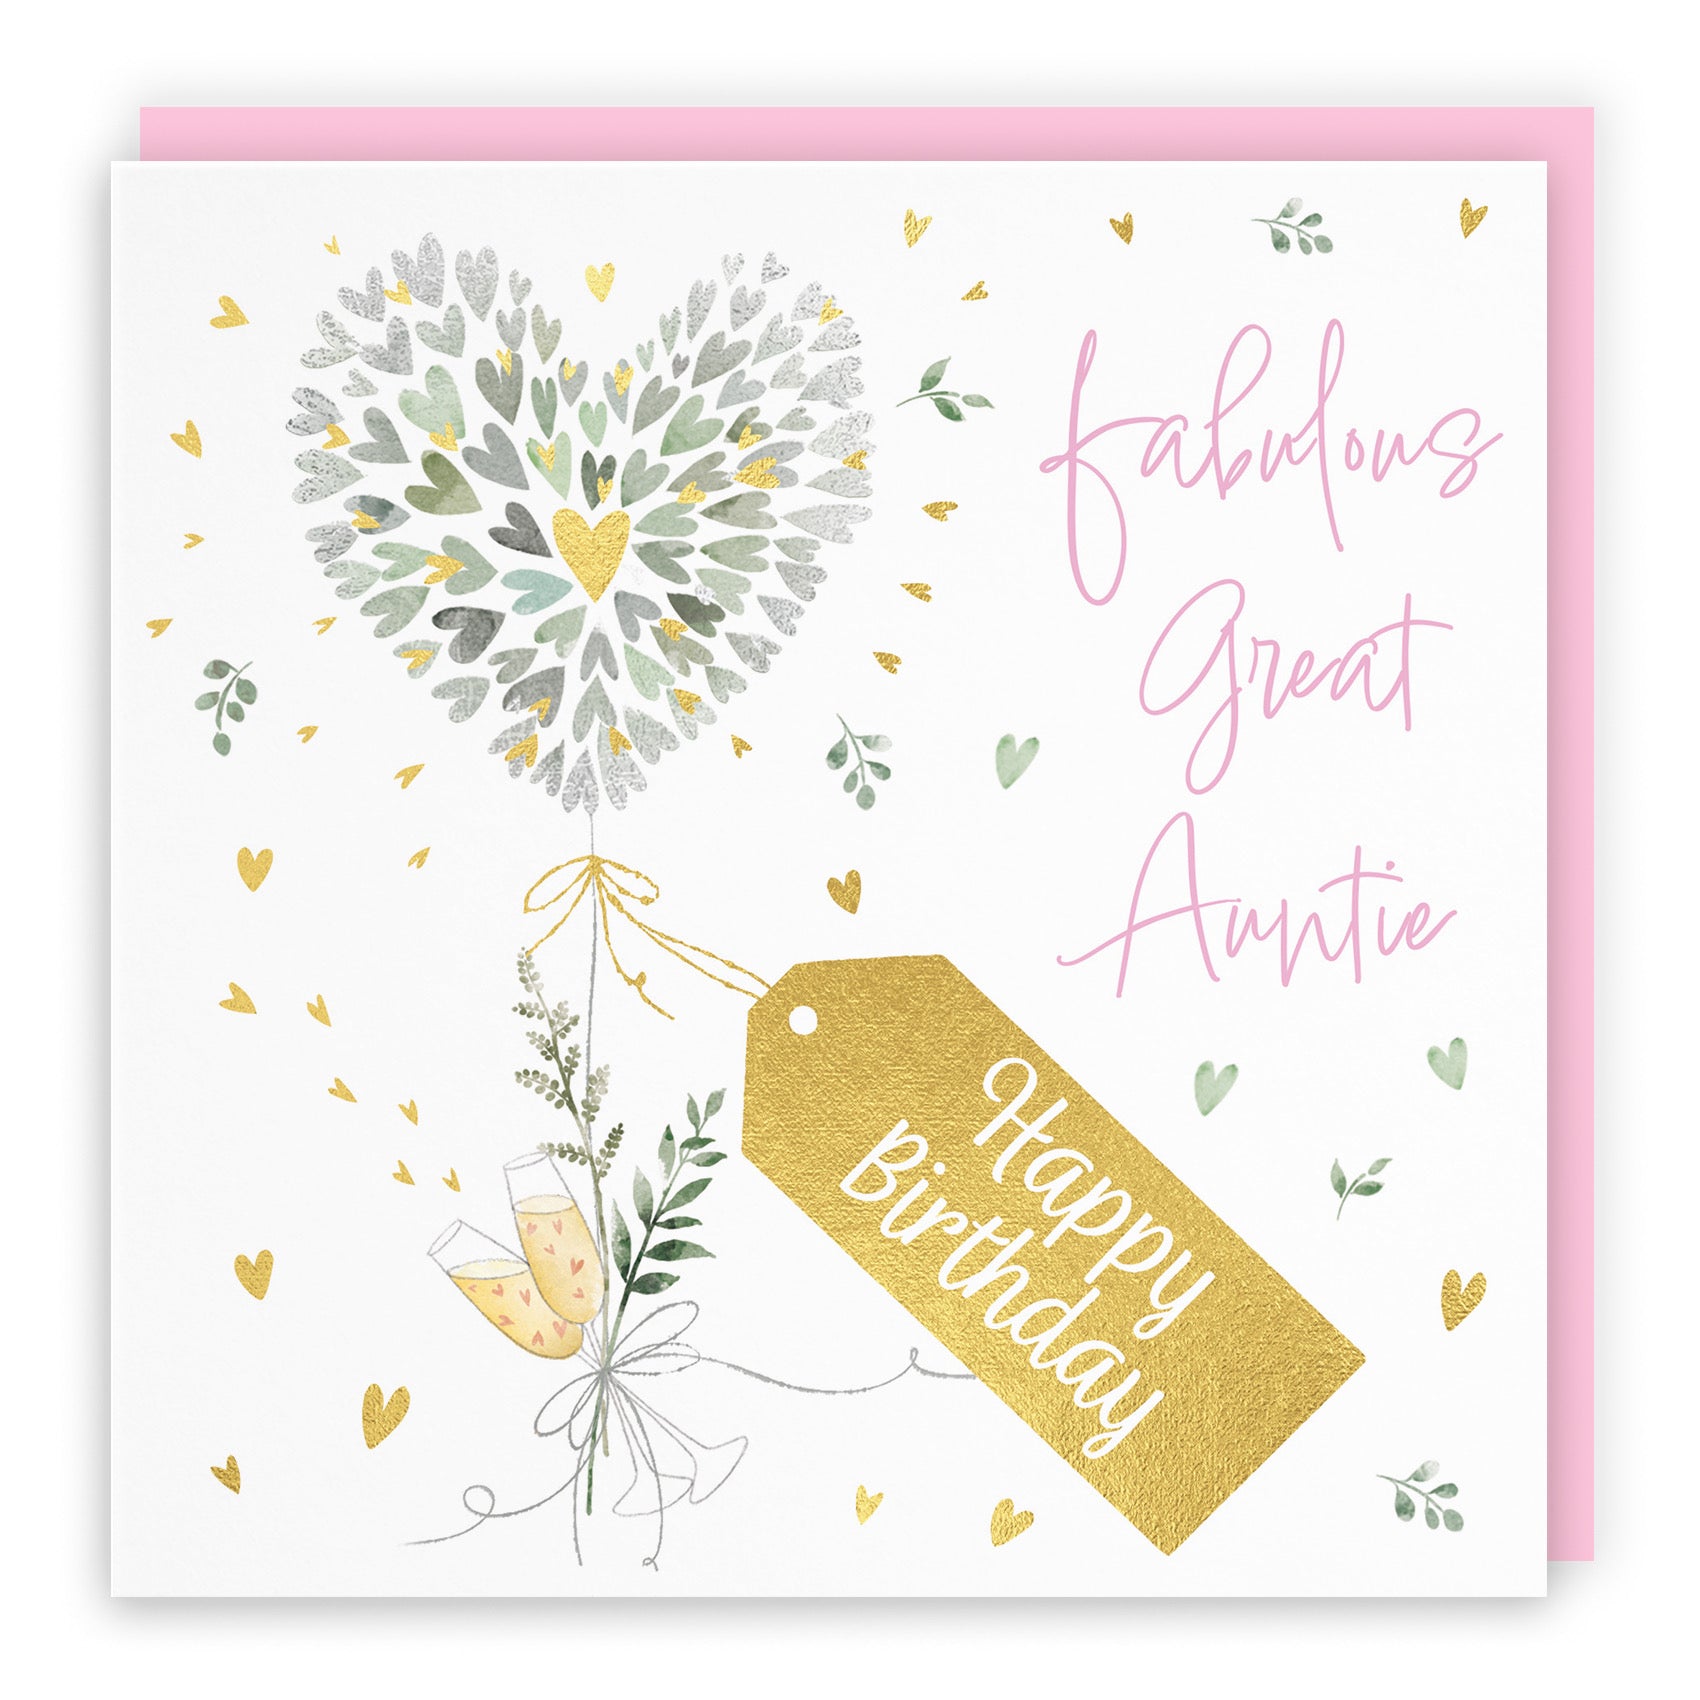 Great Auntie Contemporary Hearts Birthday Card Gold Foil Milo's Gallery - Default Title (B0CY9W4YYN)